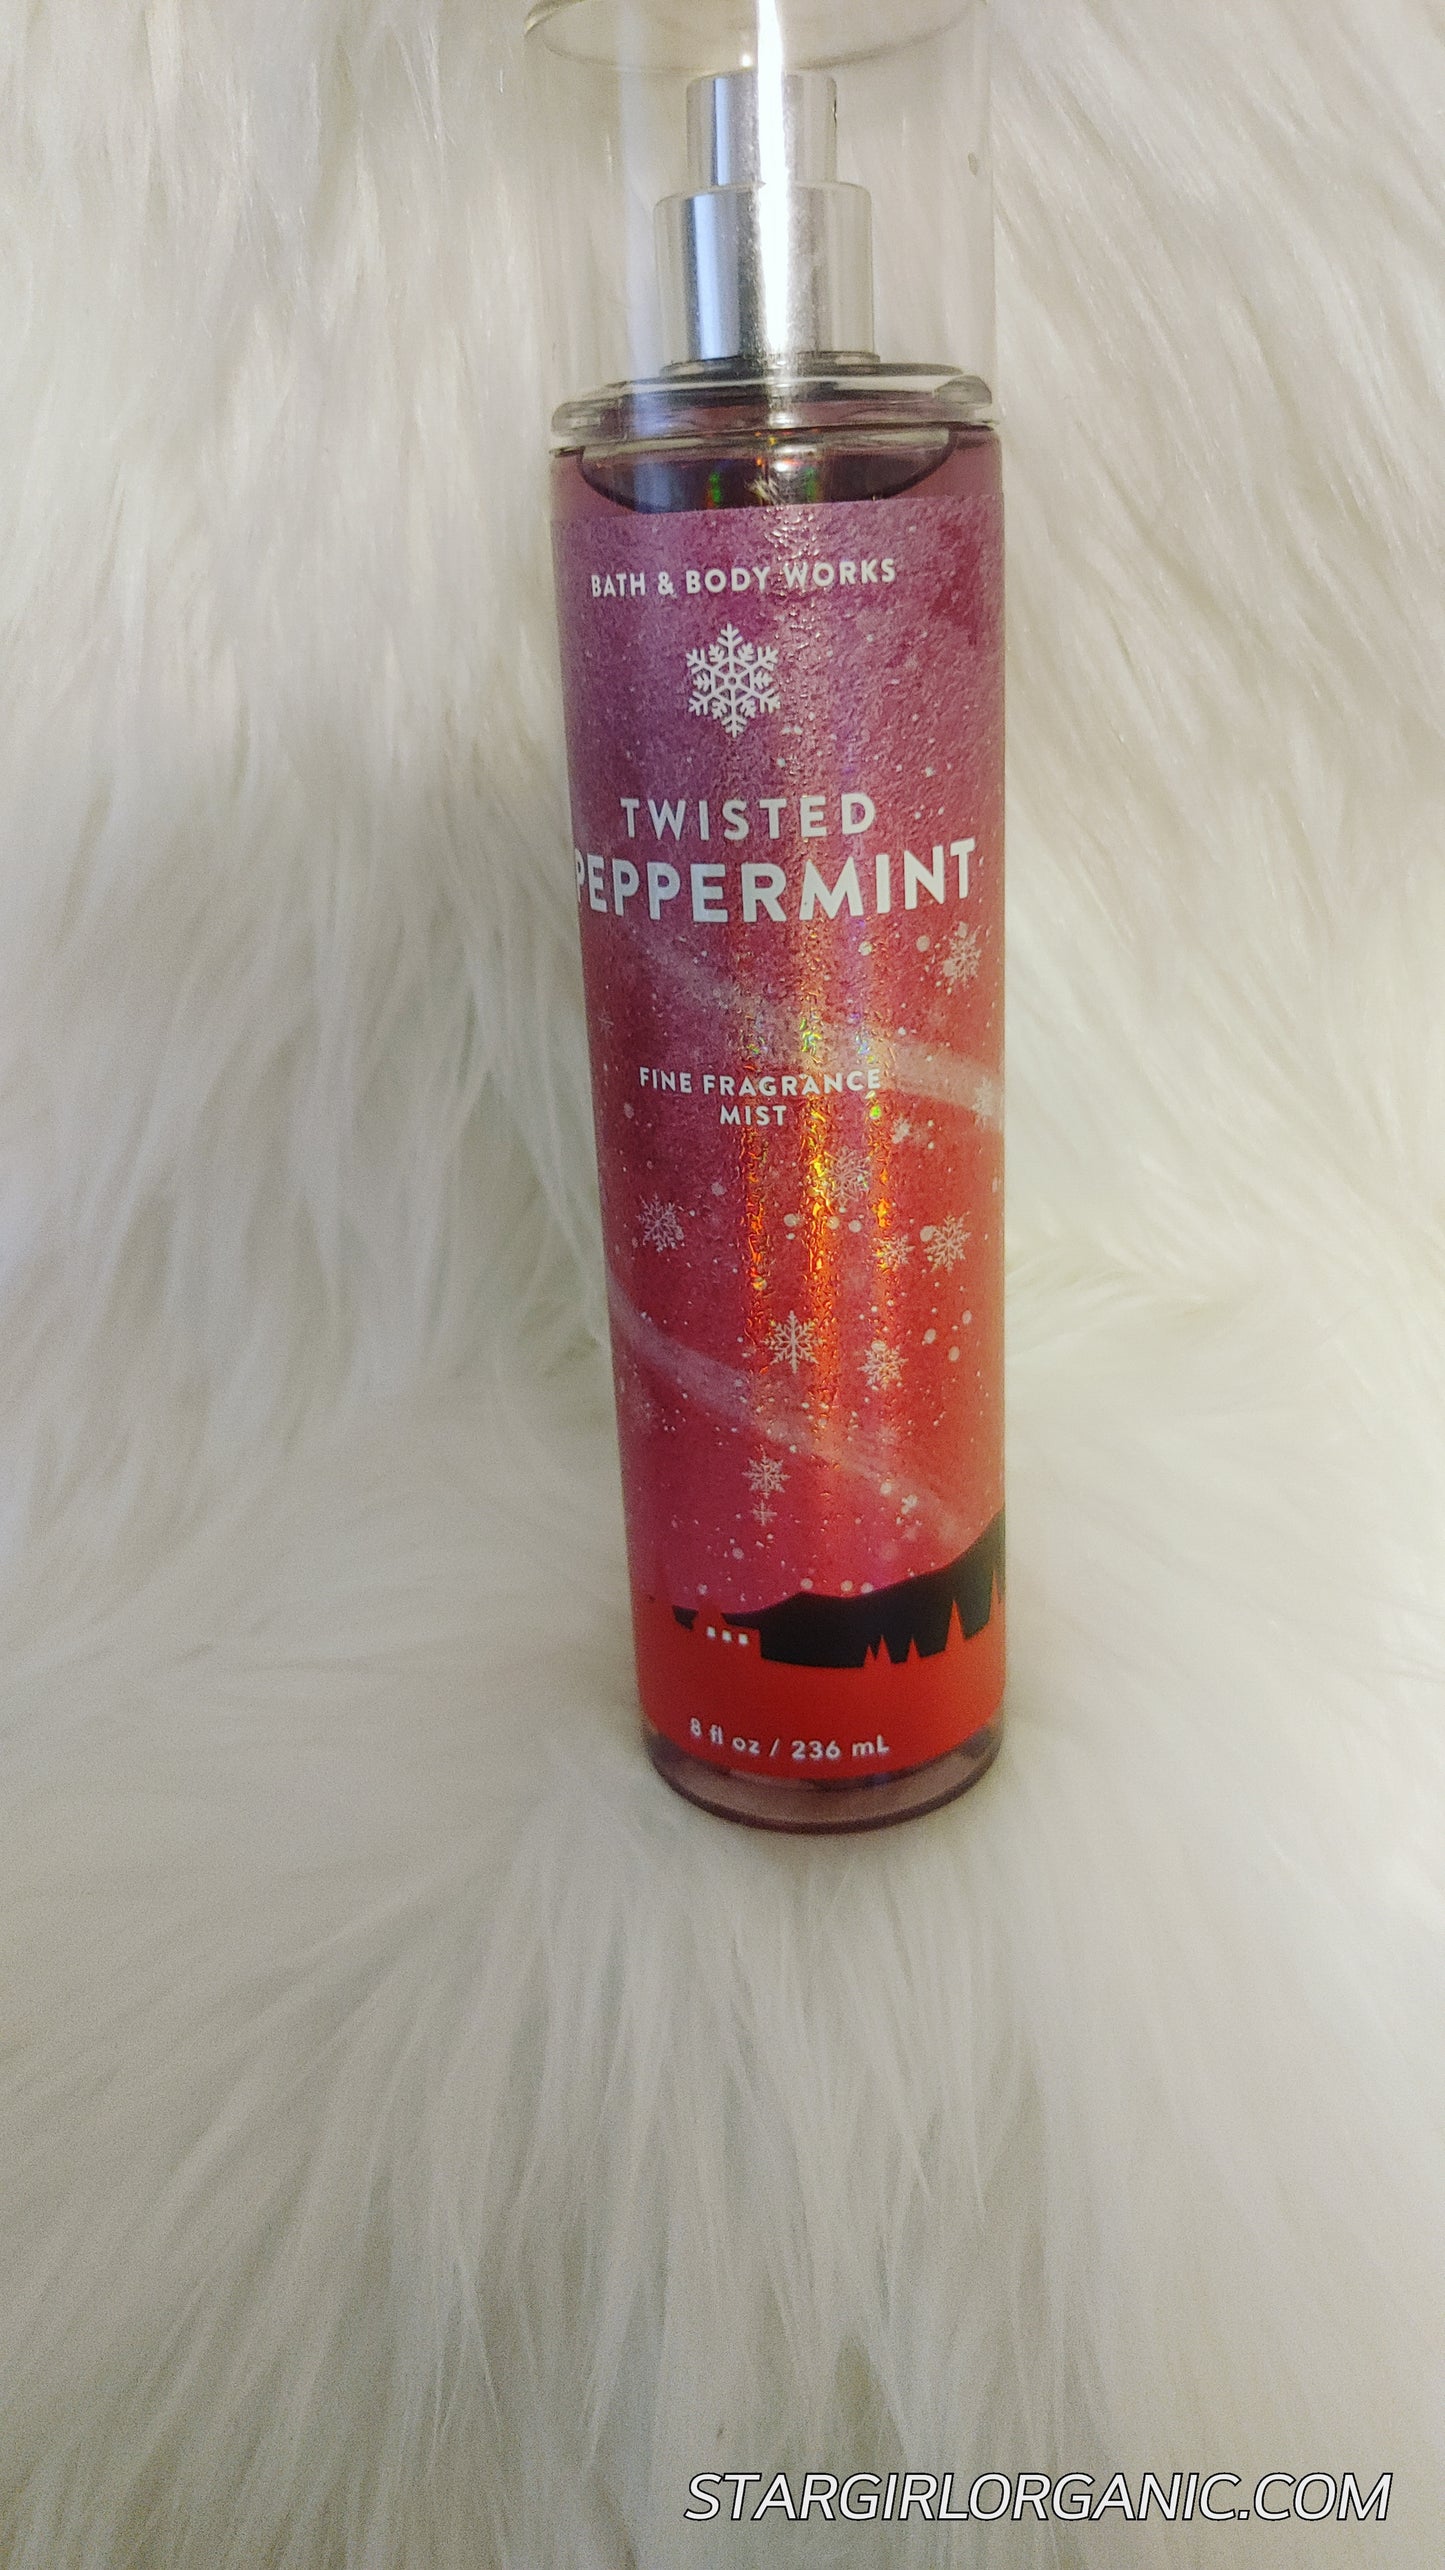 Bath and Body Works Twisted Peppermint Fragrance Mist